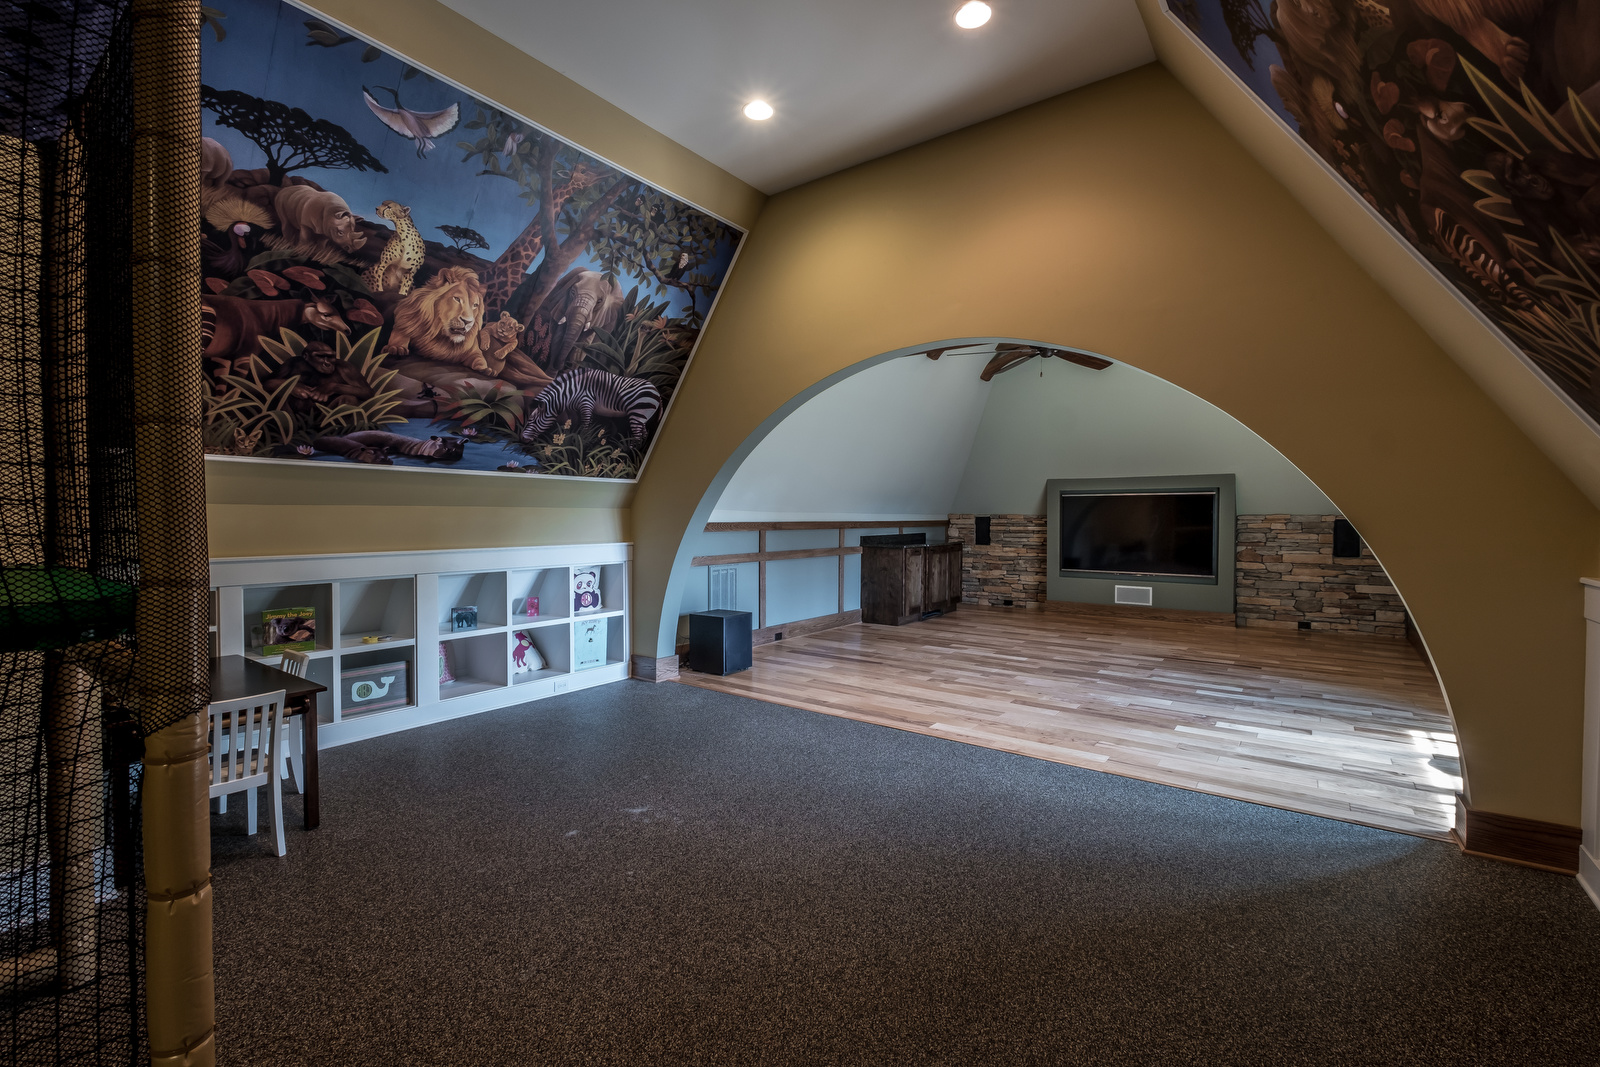 Large playroom with arch dividing the room light brown walls recessed lighting two huge animal murals on the walls